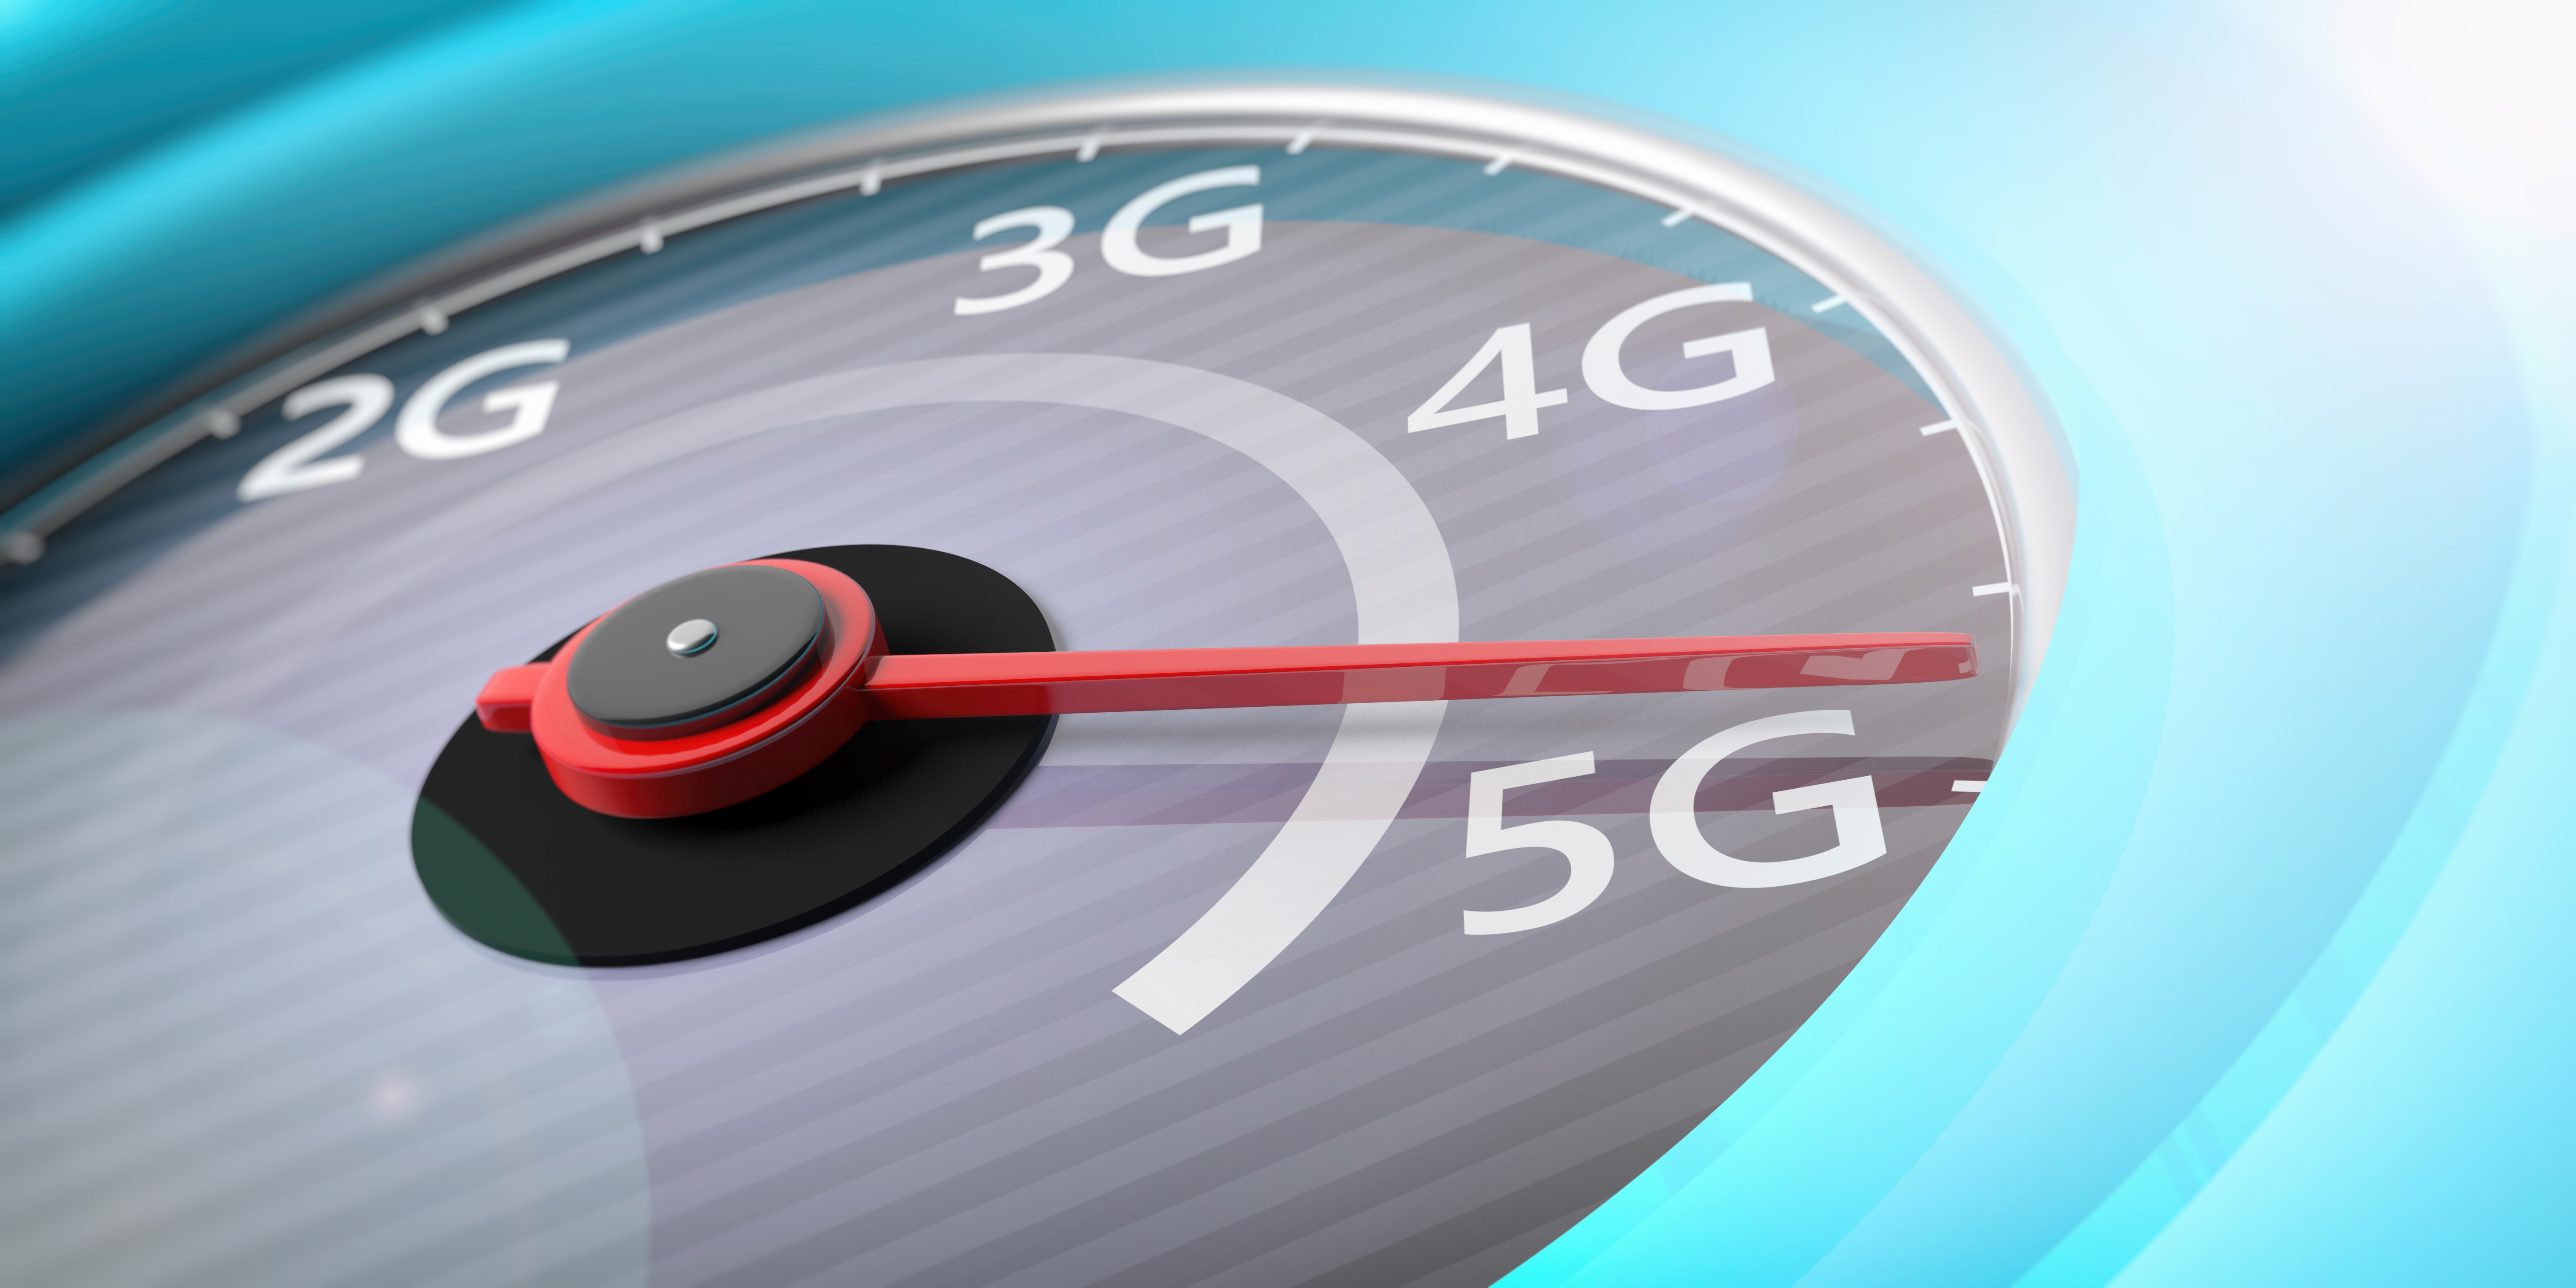 5G: Faster internet with fifth-generation mobile communications